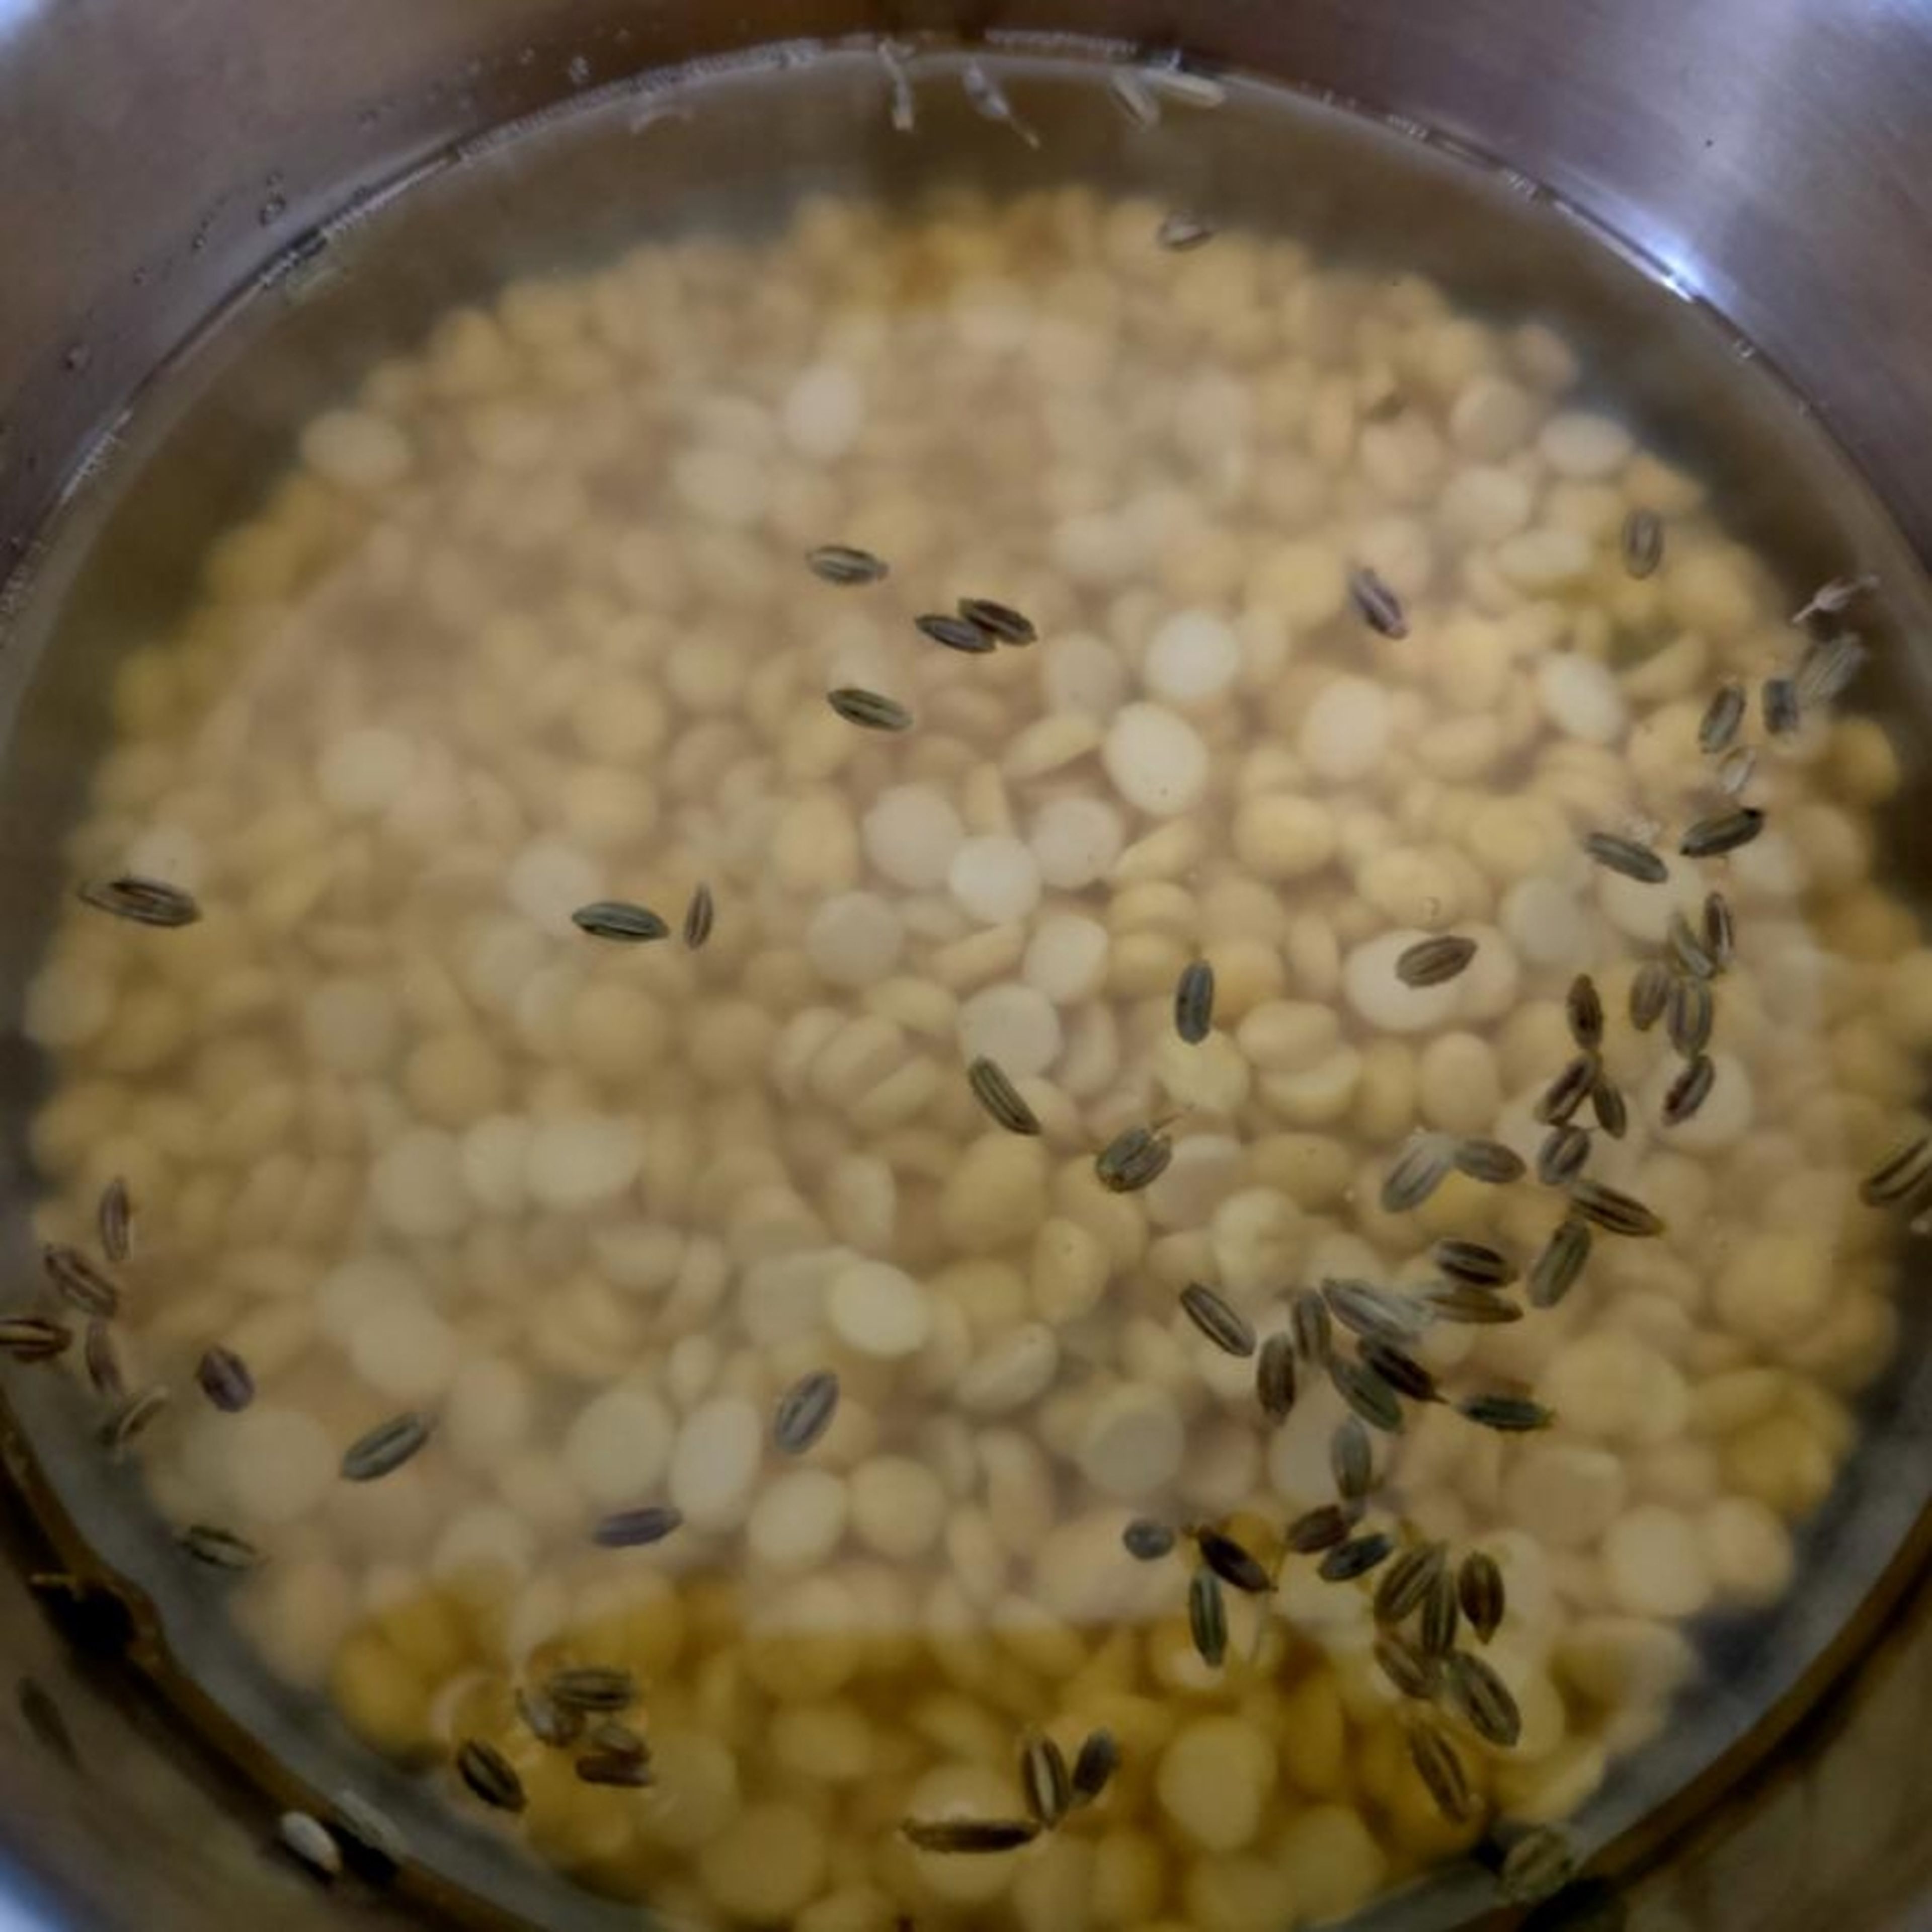 soak the chana dal and fennel seeds for about 2 hrs